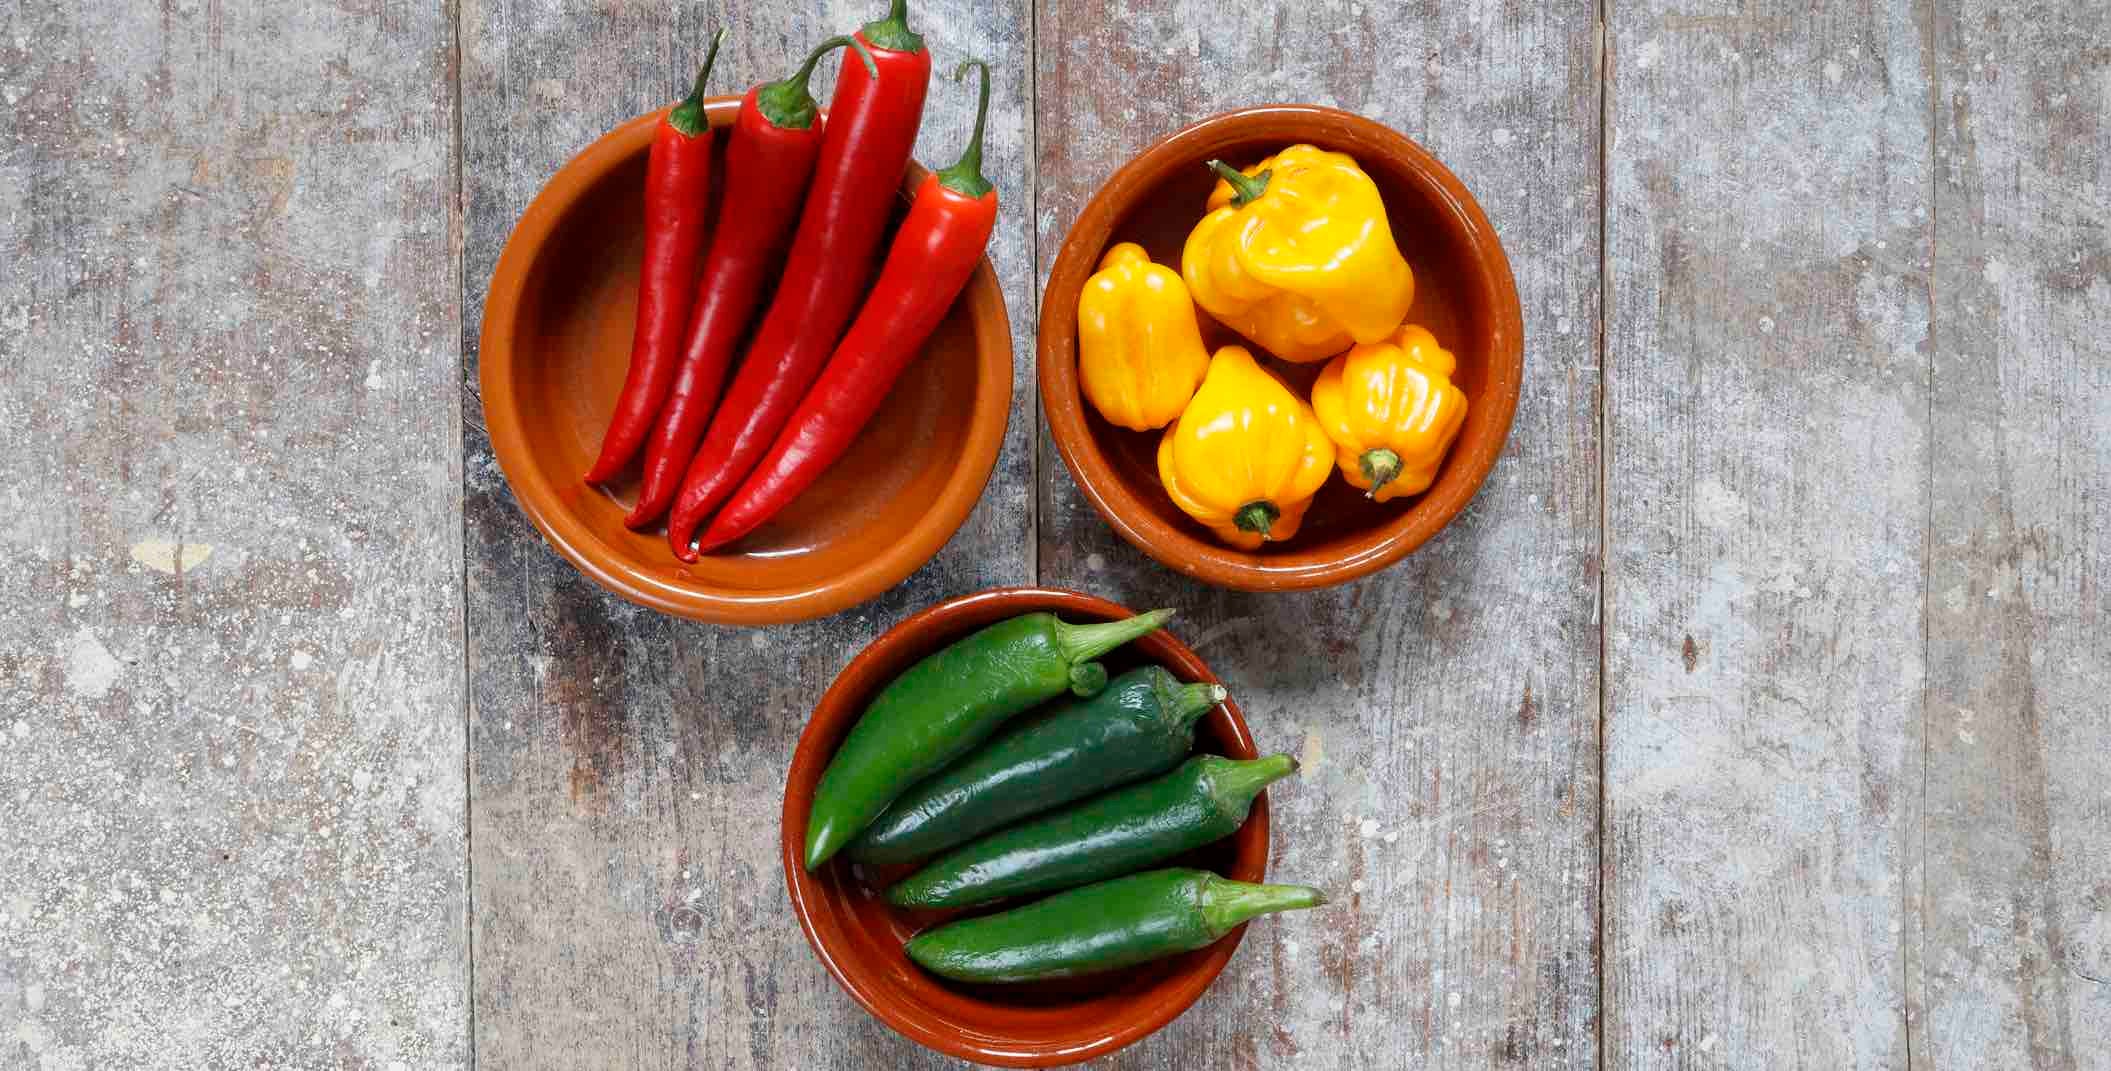 Three bowls, each containing a different type of fresh chile pepper, including thai bird, jalapeno, and scotch bonnet chiles, on a light gray wooden floor